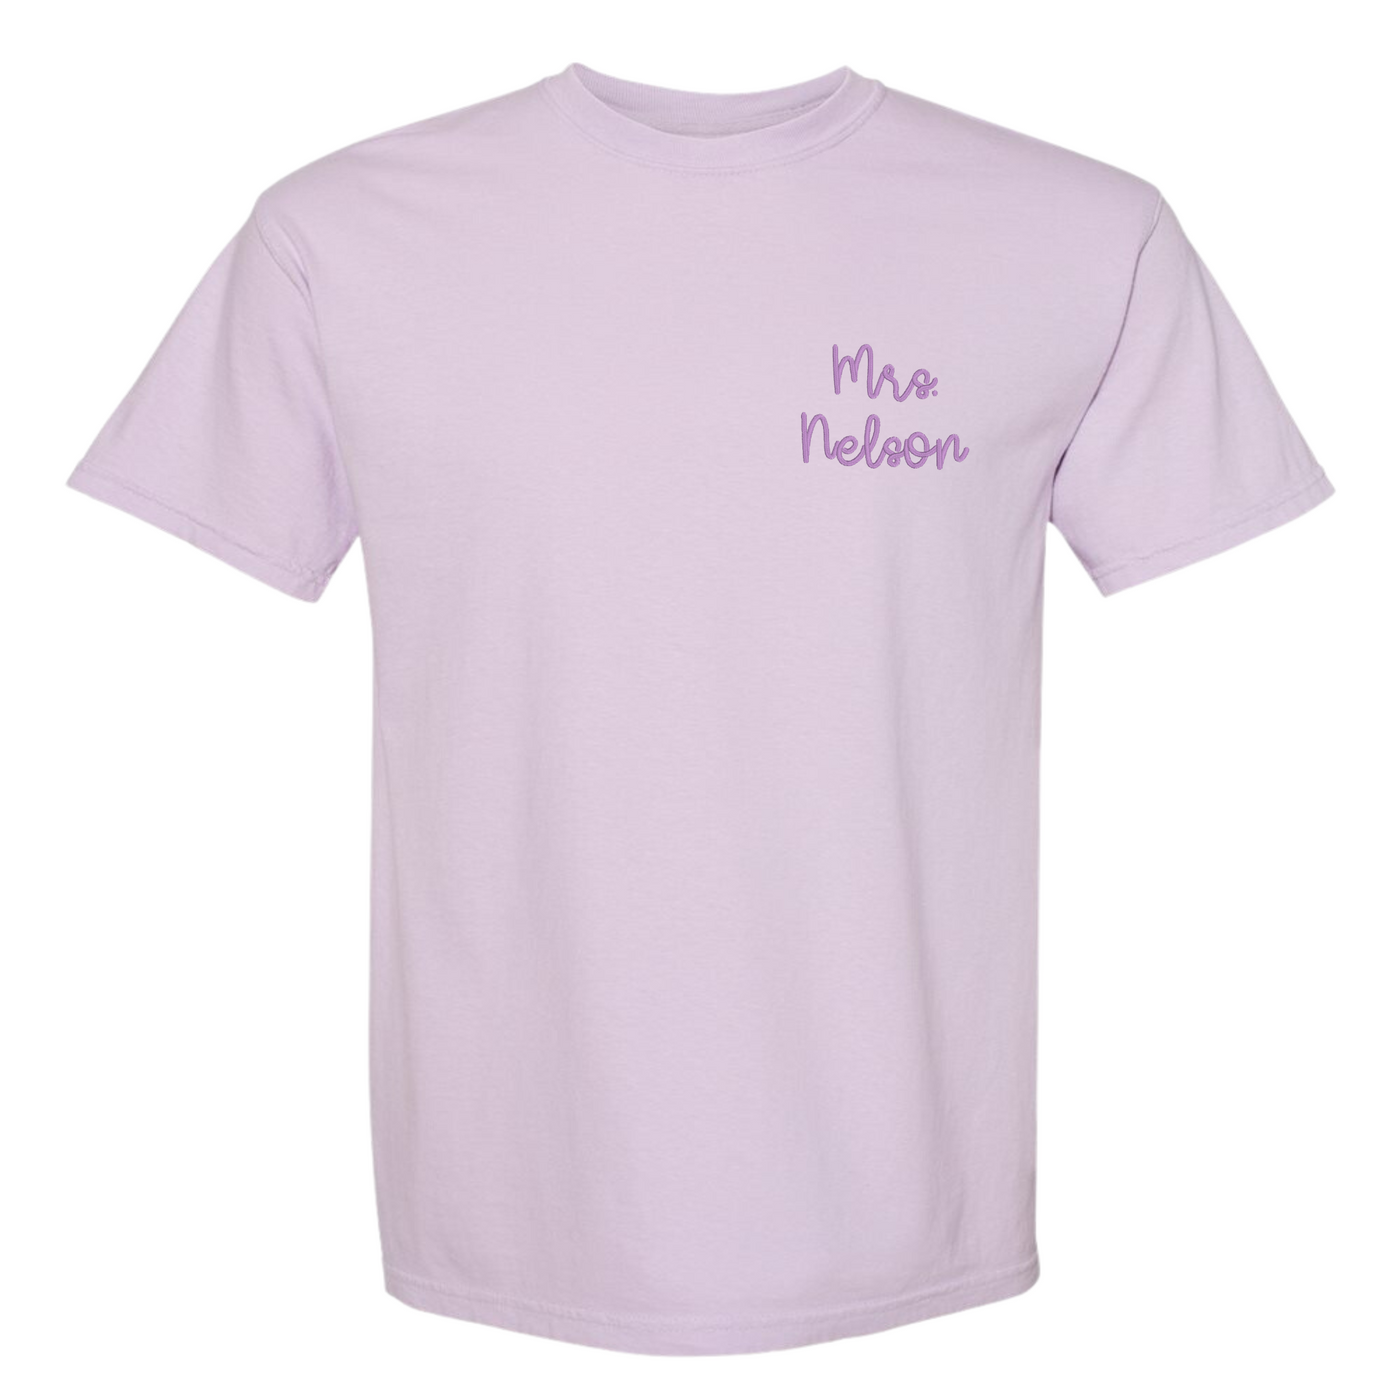 Embroidered Personalized Bride T-shirt - Barn Street Designs